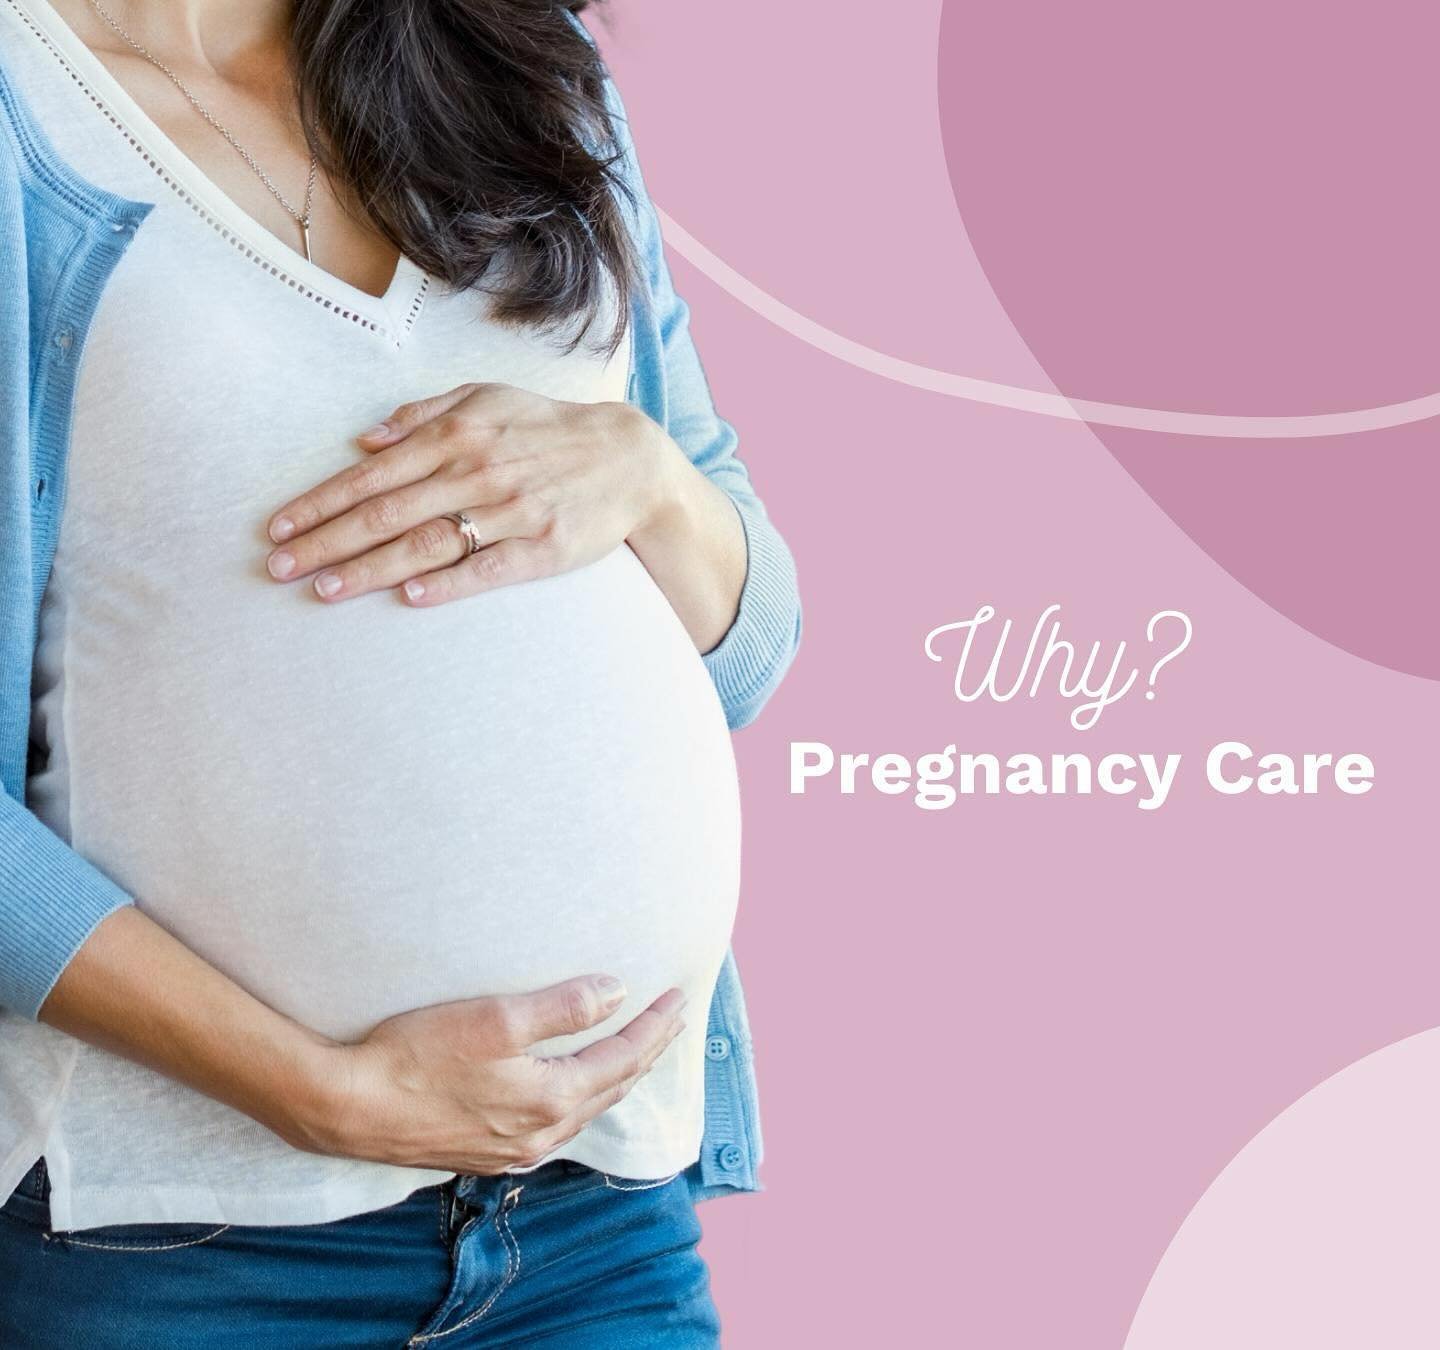 Why see a chiropractor when you&rsquo;re expecting?

⭐️ Because your body&rsquo;s ability to change is amazing! During pregnancy your body produces more of the hormone relaxin. ⭐️✨

Relaxin allows the ligaments to become more relaxed and malleable to